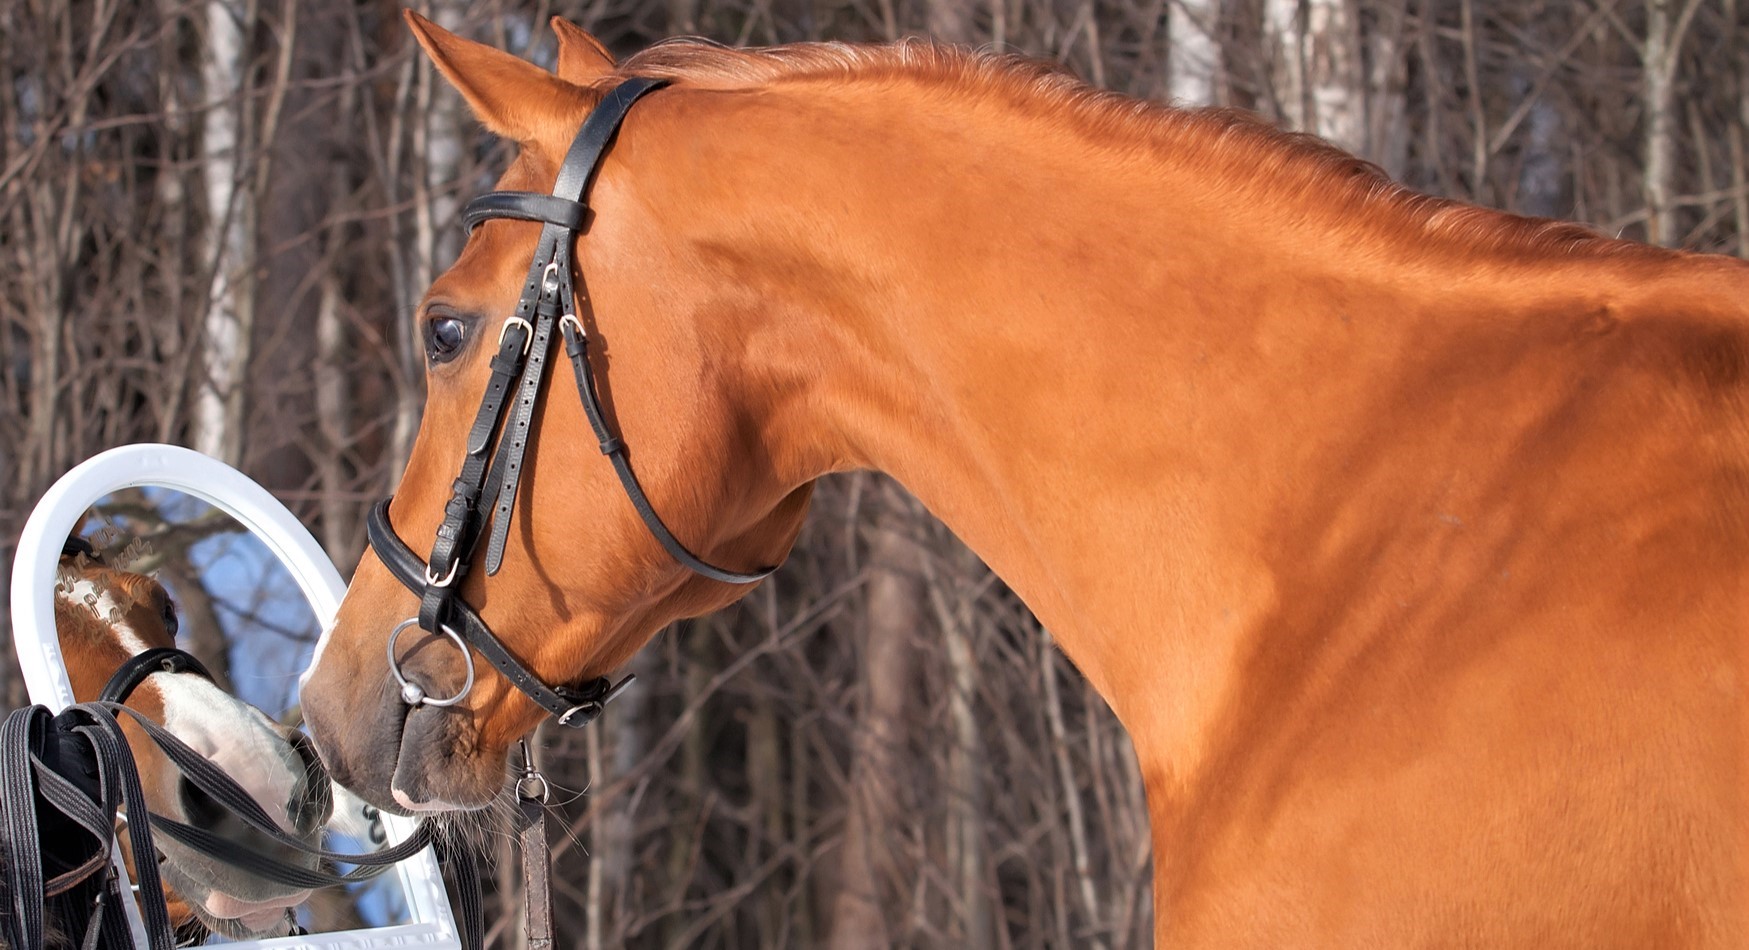 How Smart are Horses? Horse Intelligence Facts, Comparisons & Studies